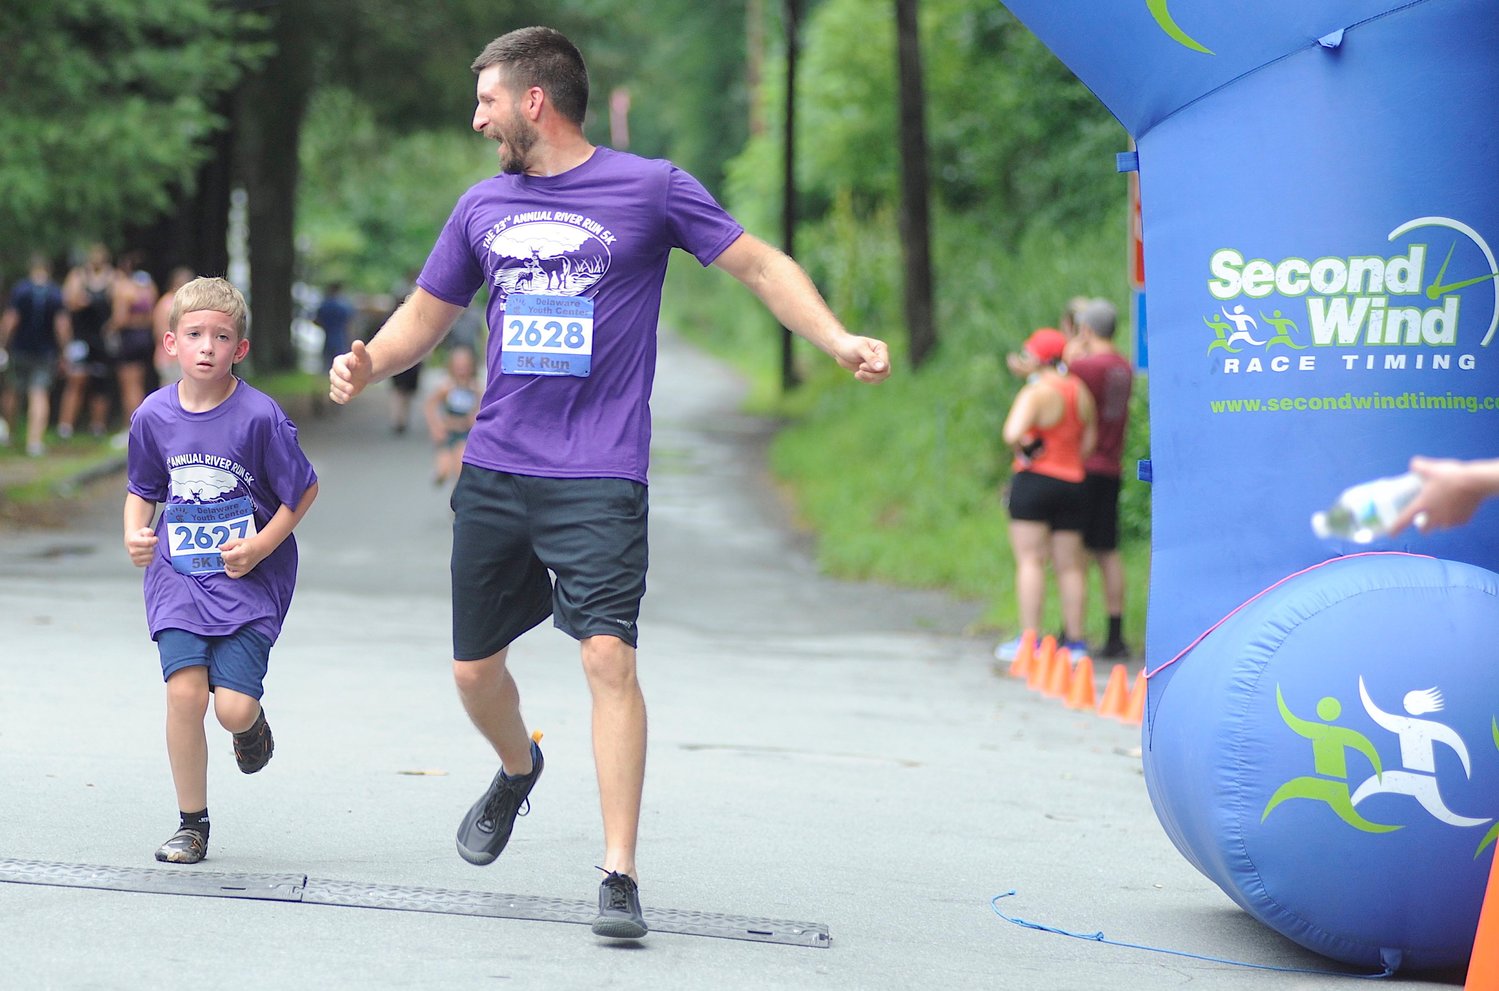 A father’s joy. Seven-year-old Carson Salvatore of Honesdale, PA crossed the finish line one second behind his father, 35-year-old Kyle. In the men’s division, they finished respectively 49th and 50th at 32:55 and 32:56.